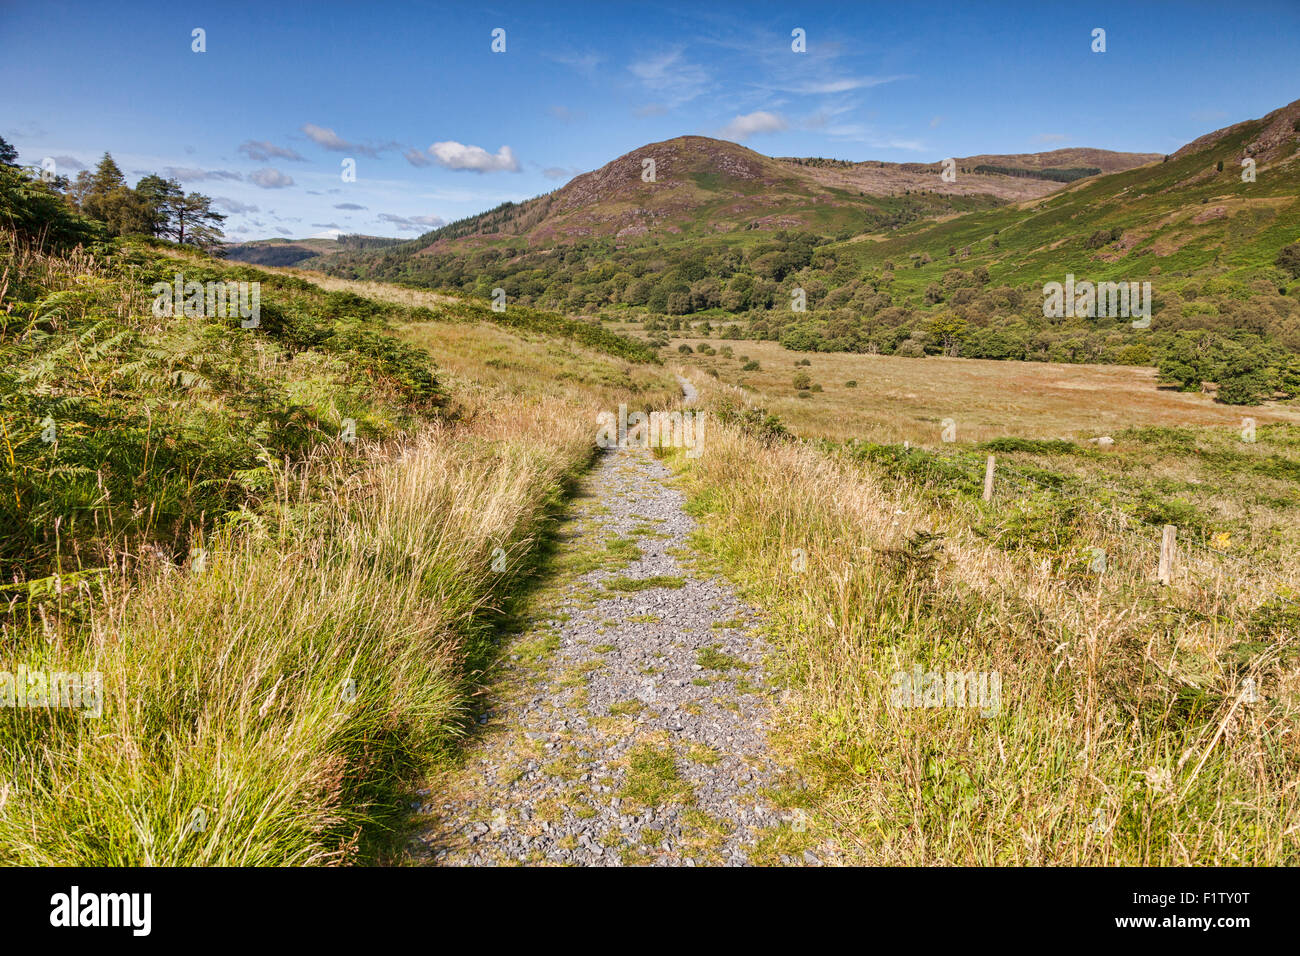 The Southern Uplands Way as it runs through the Galloway Hills in Glentrool, Dumfries and Galloway, Scotland, UK Stock Photo